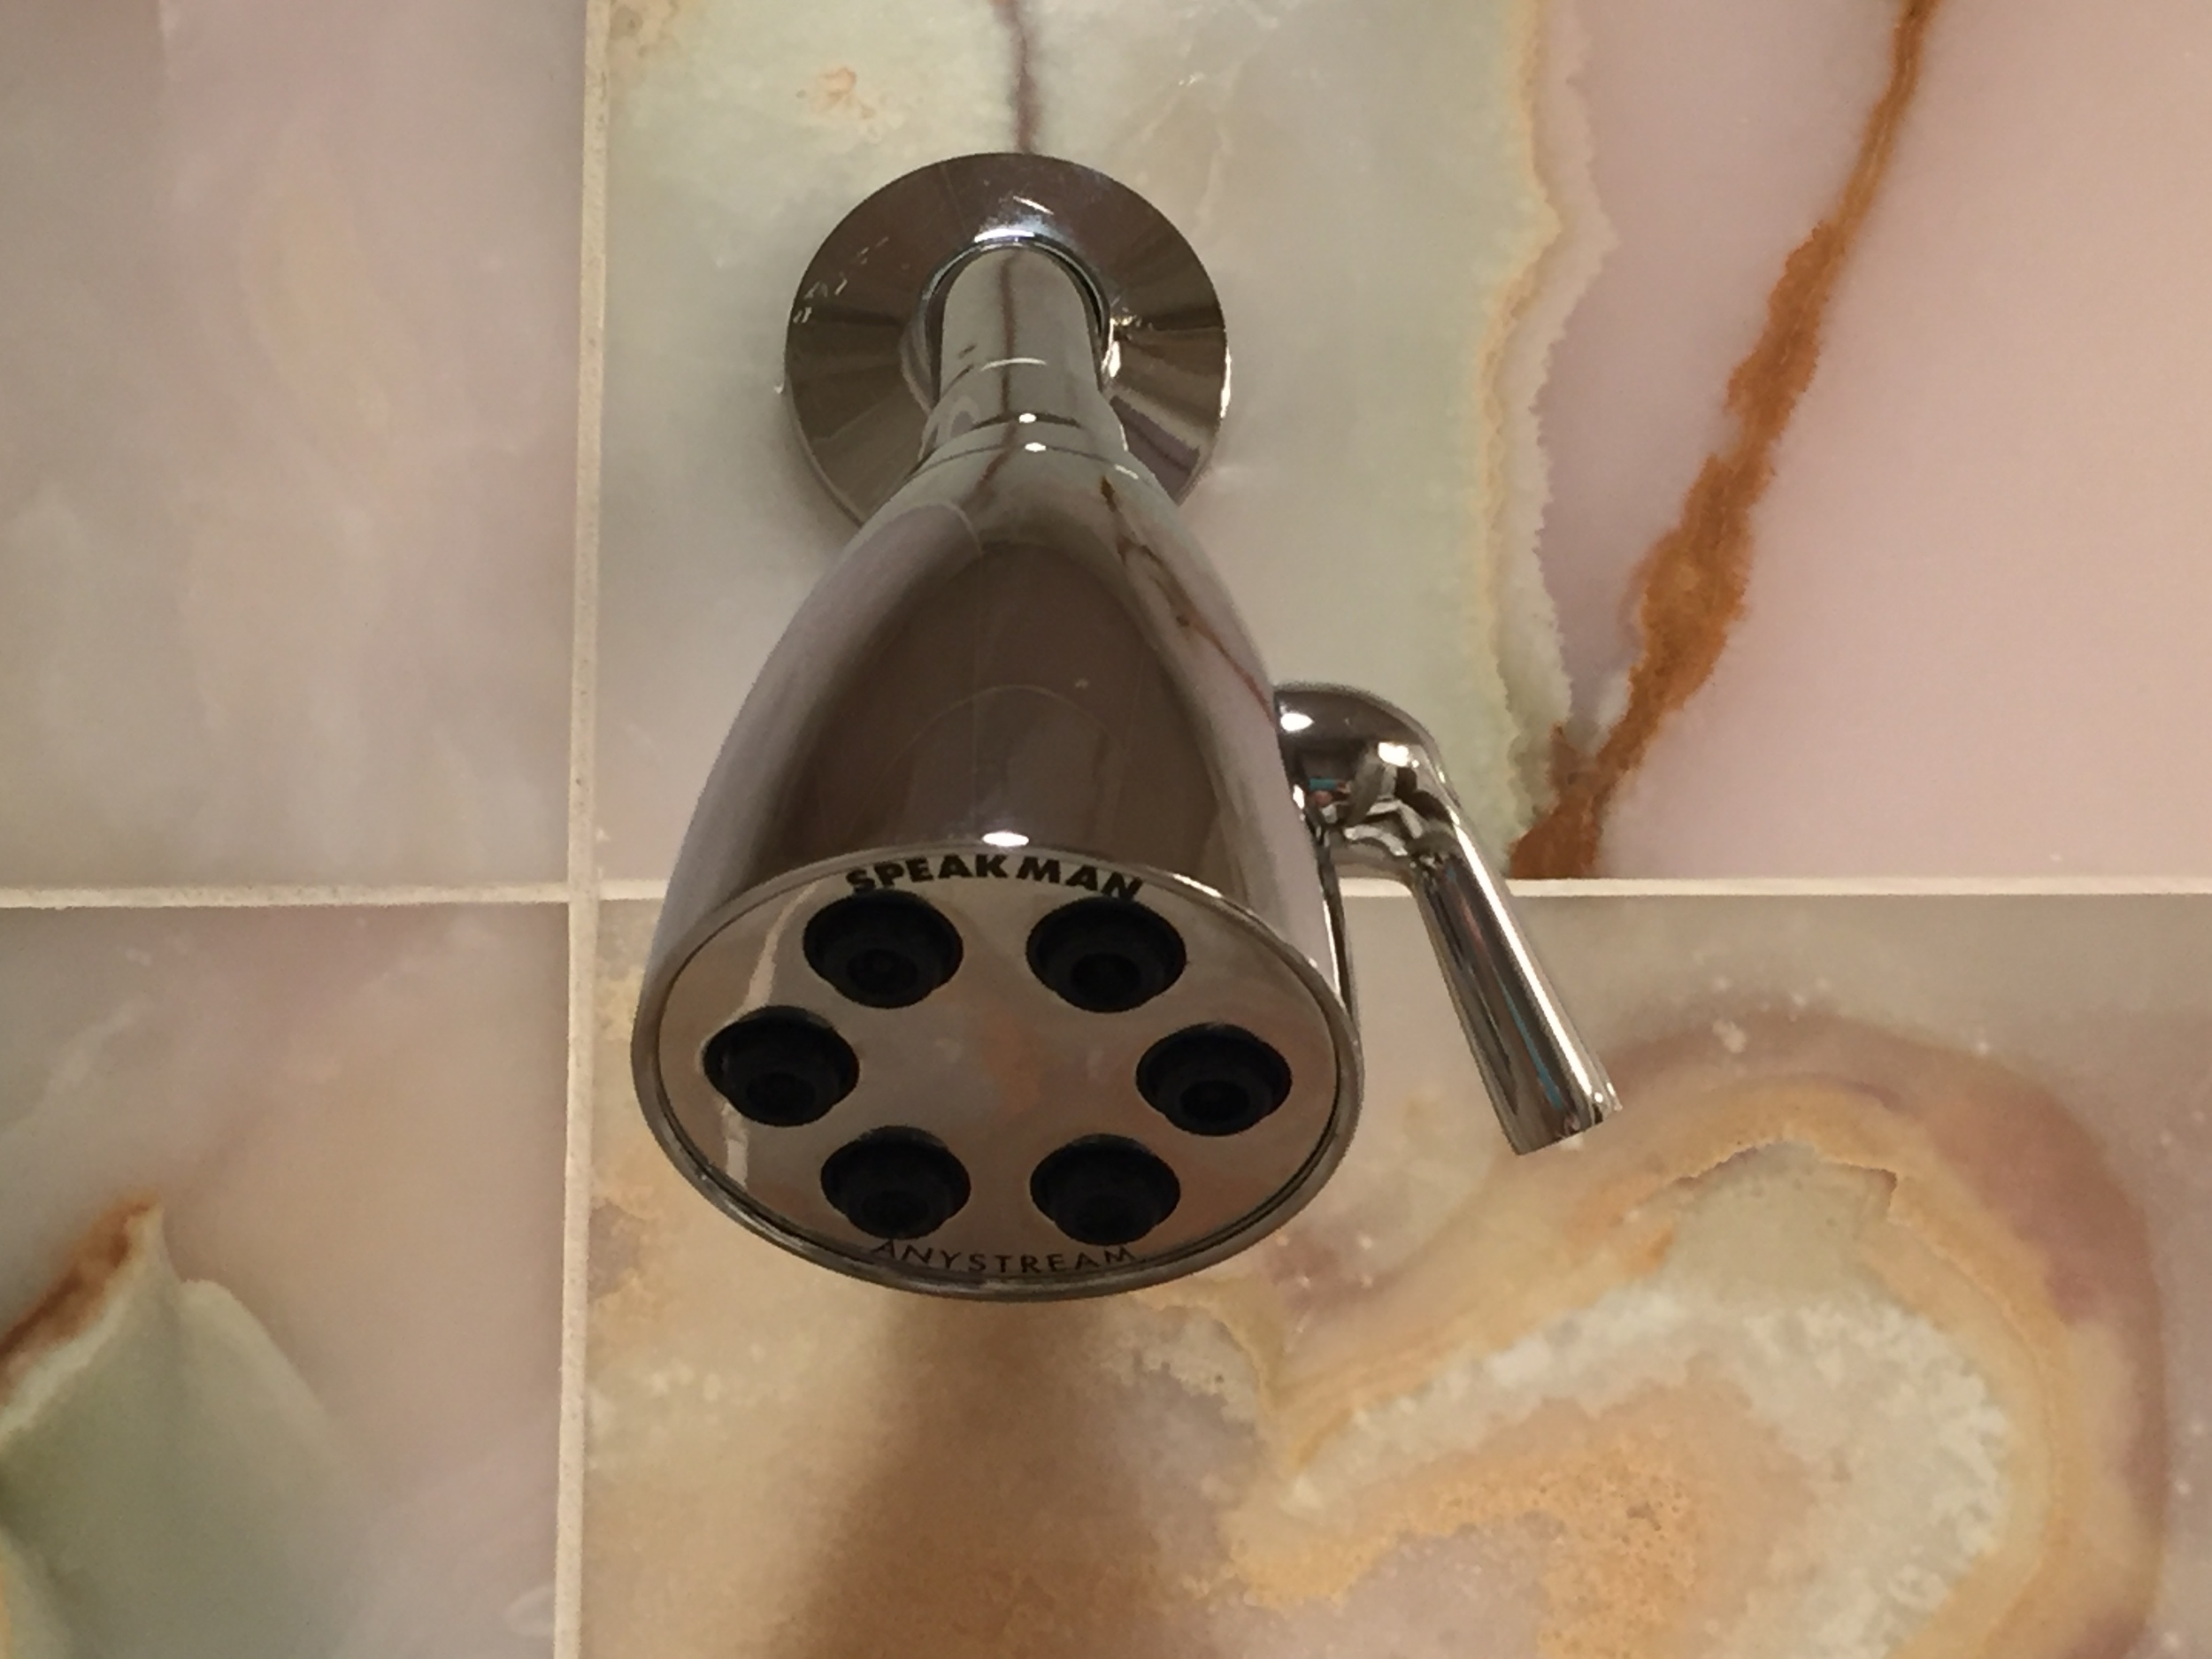 Remove an old shower head by twisting it counterclockwise